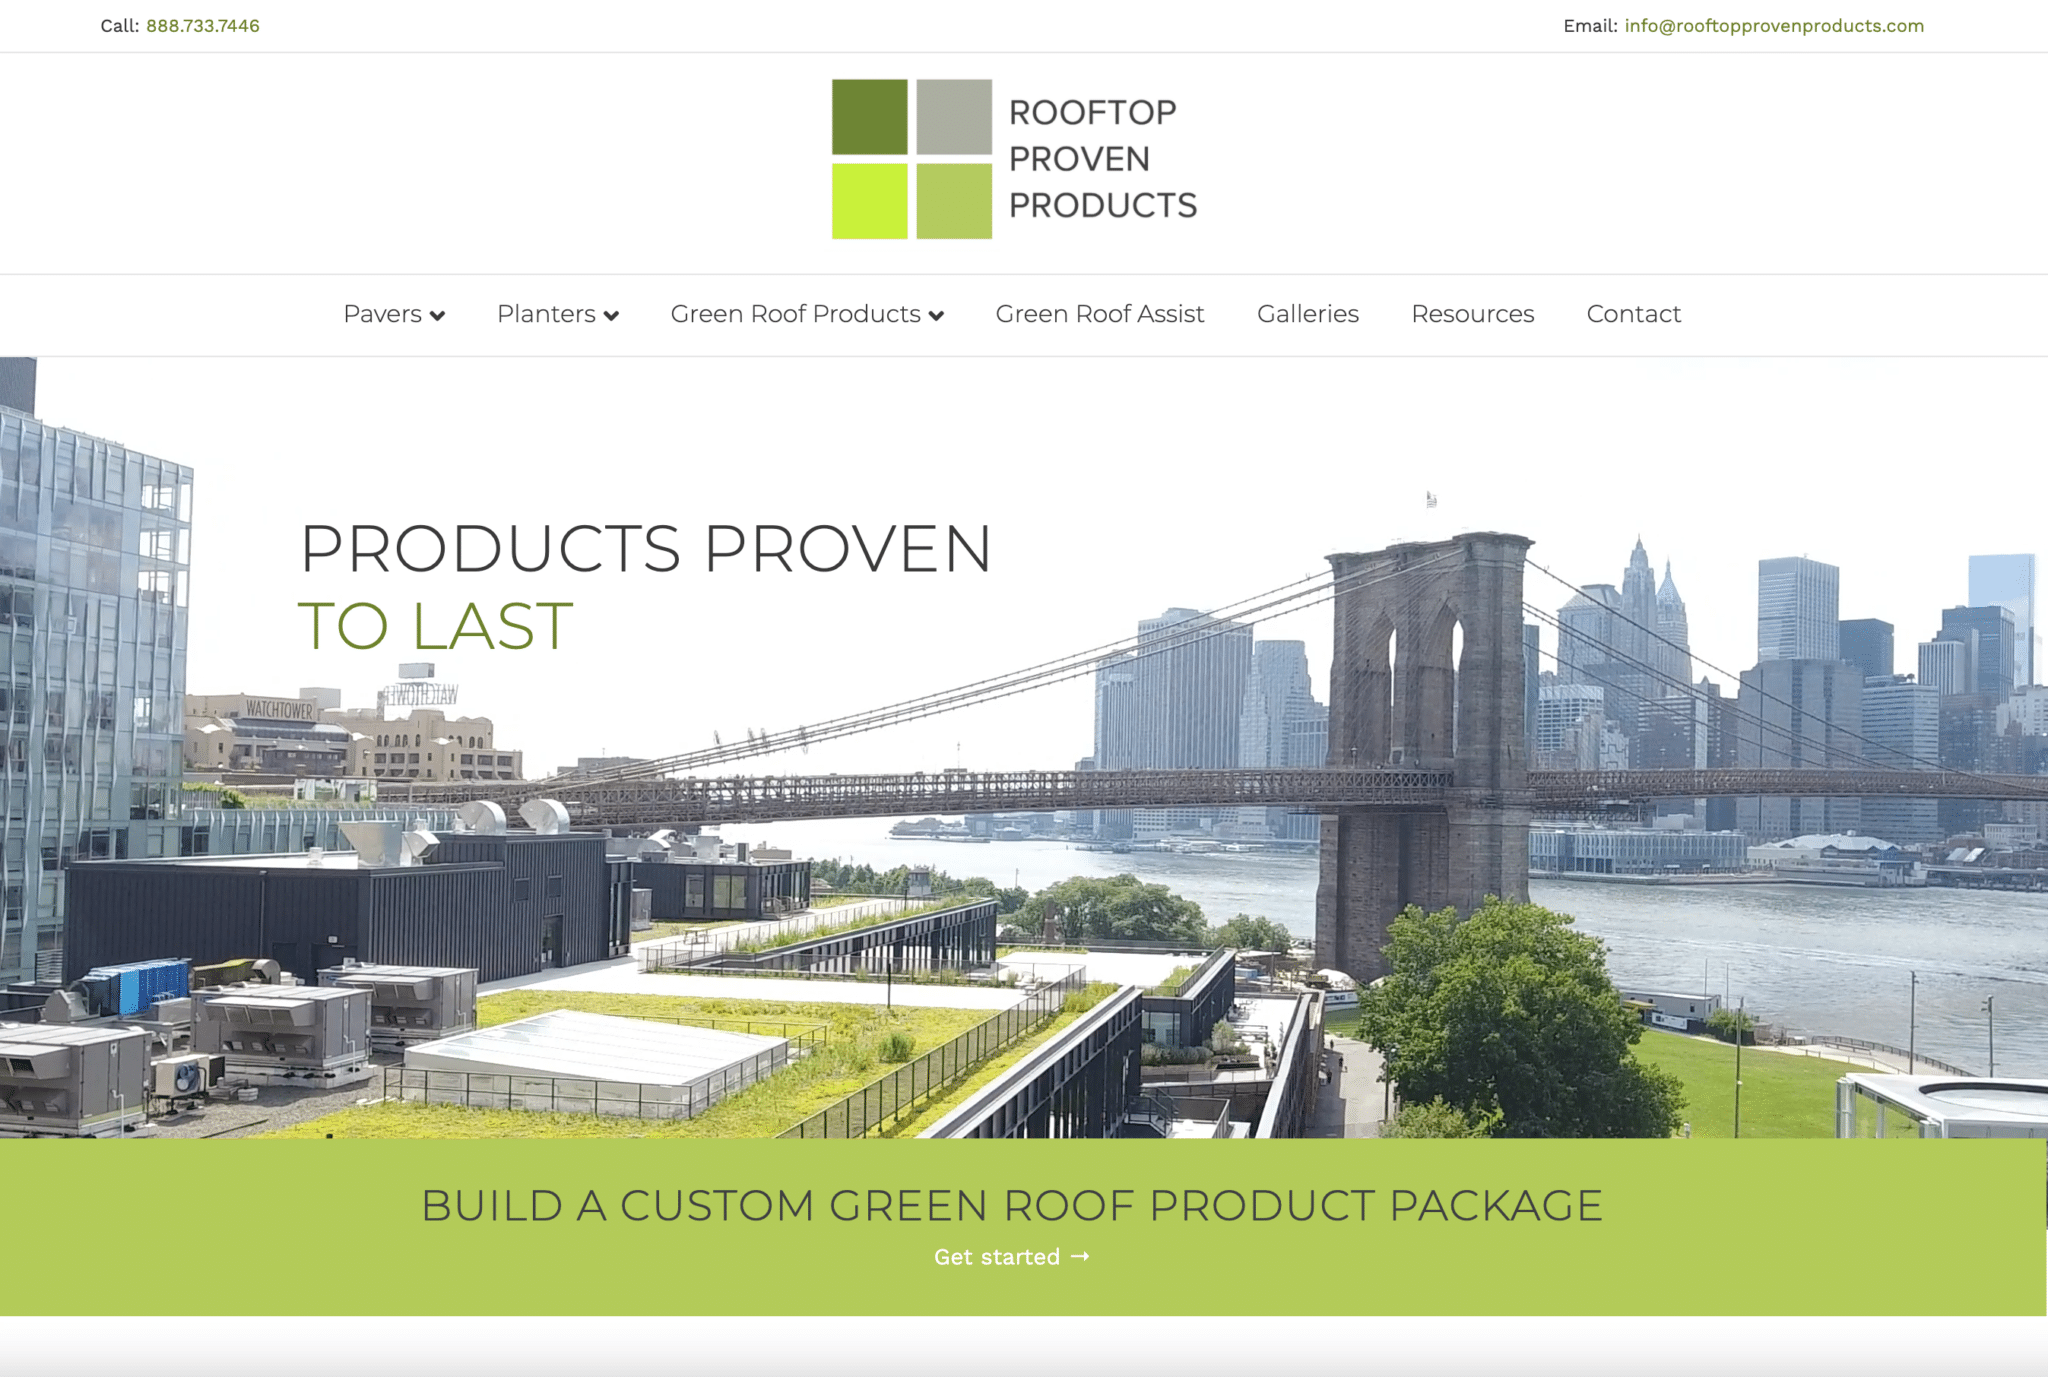 rooftop proven products website